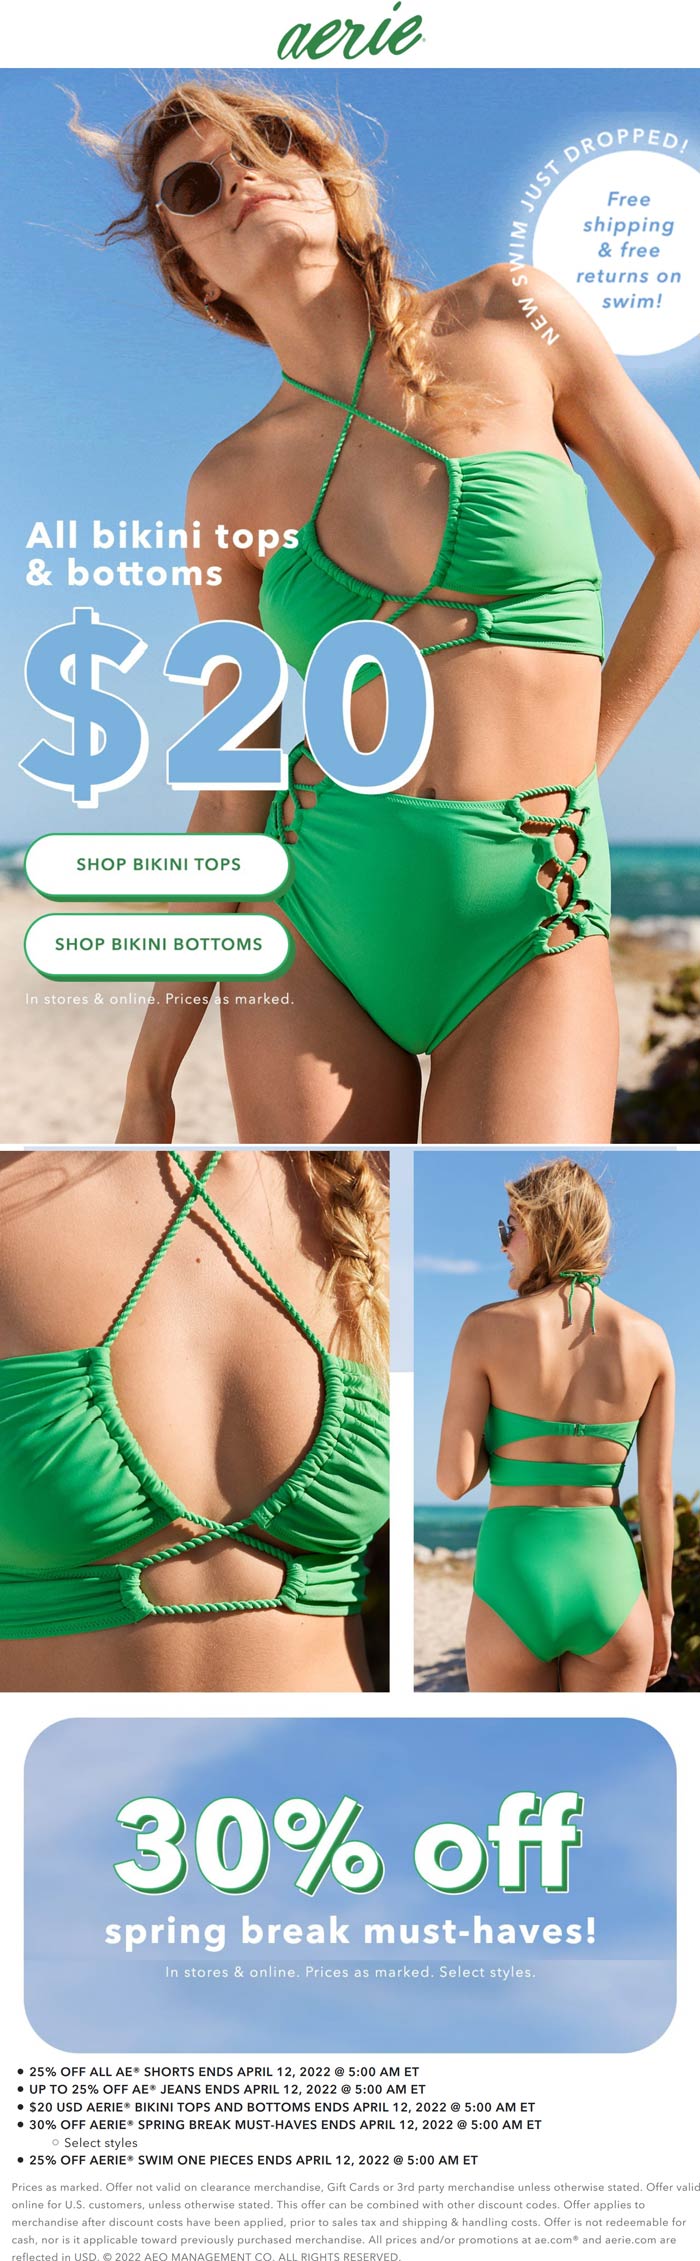 Aerie stores Coupon  30% off spring break + $20 bikini tops & bottoms at Aerie #aerie 